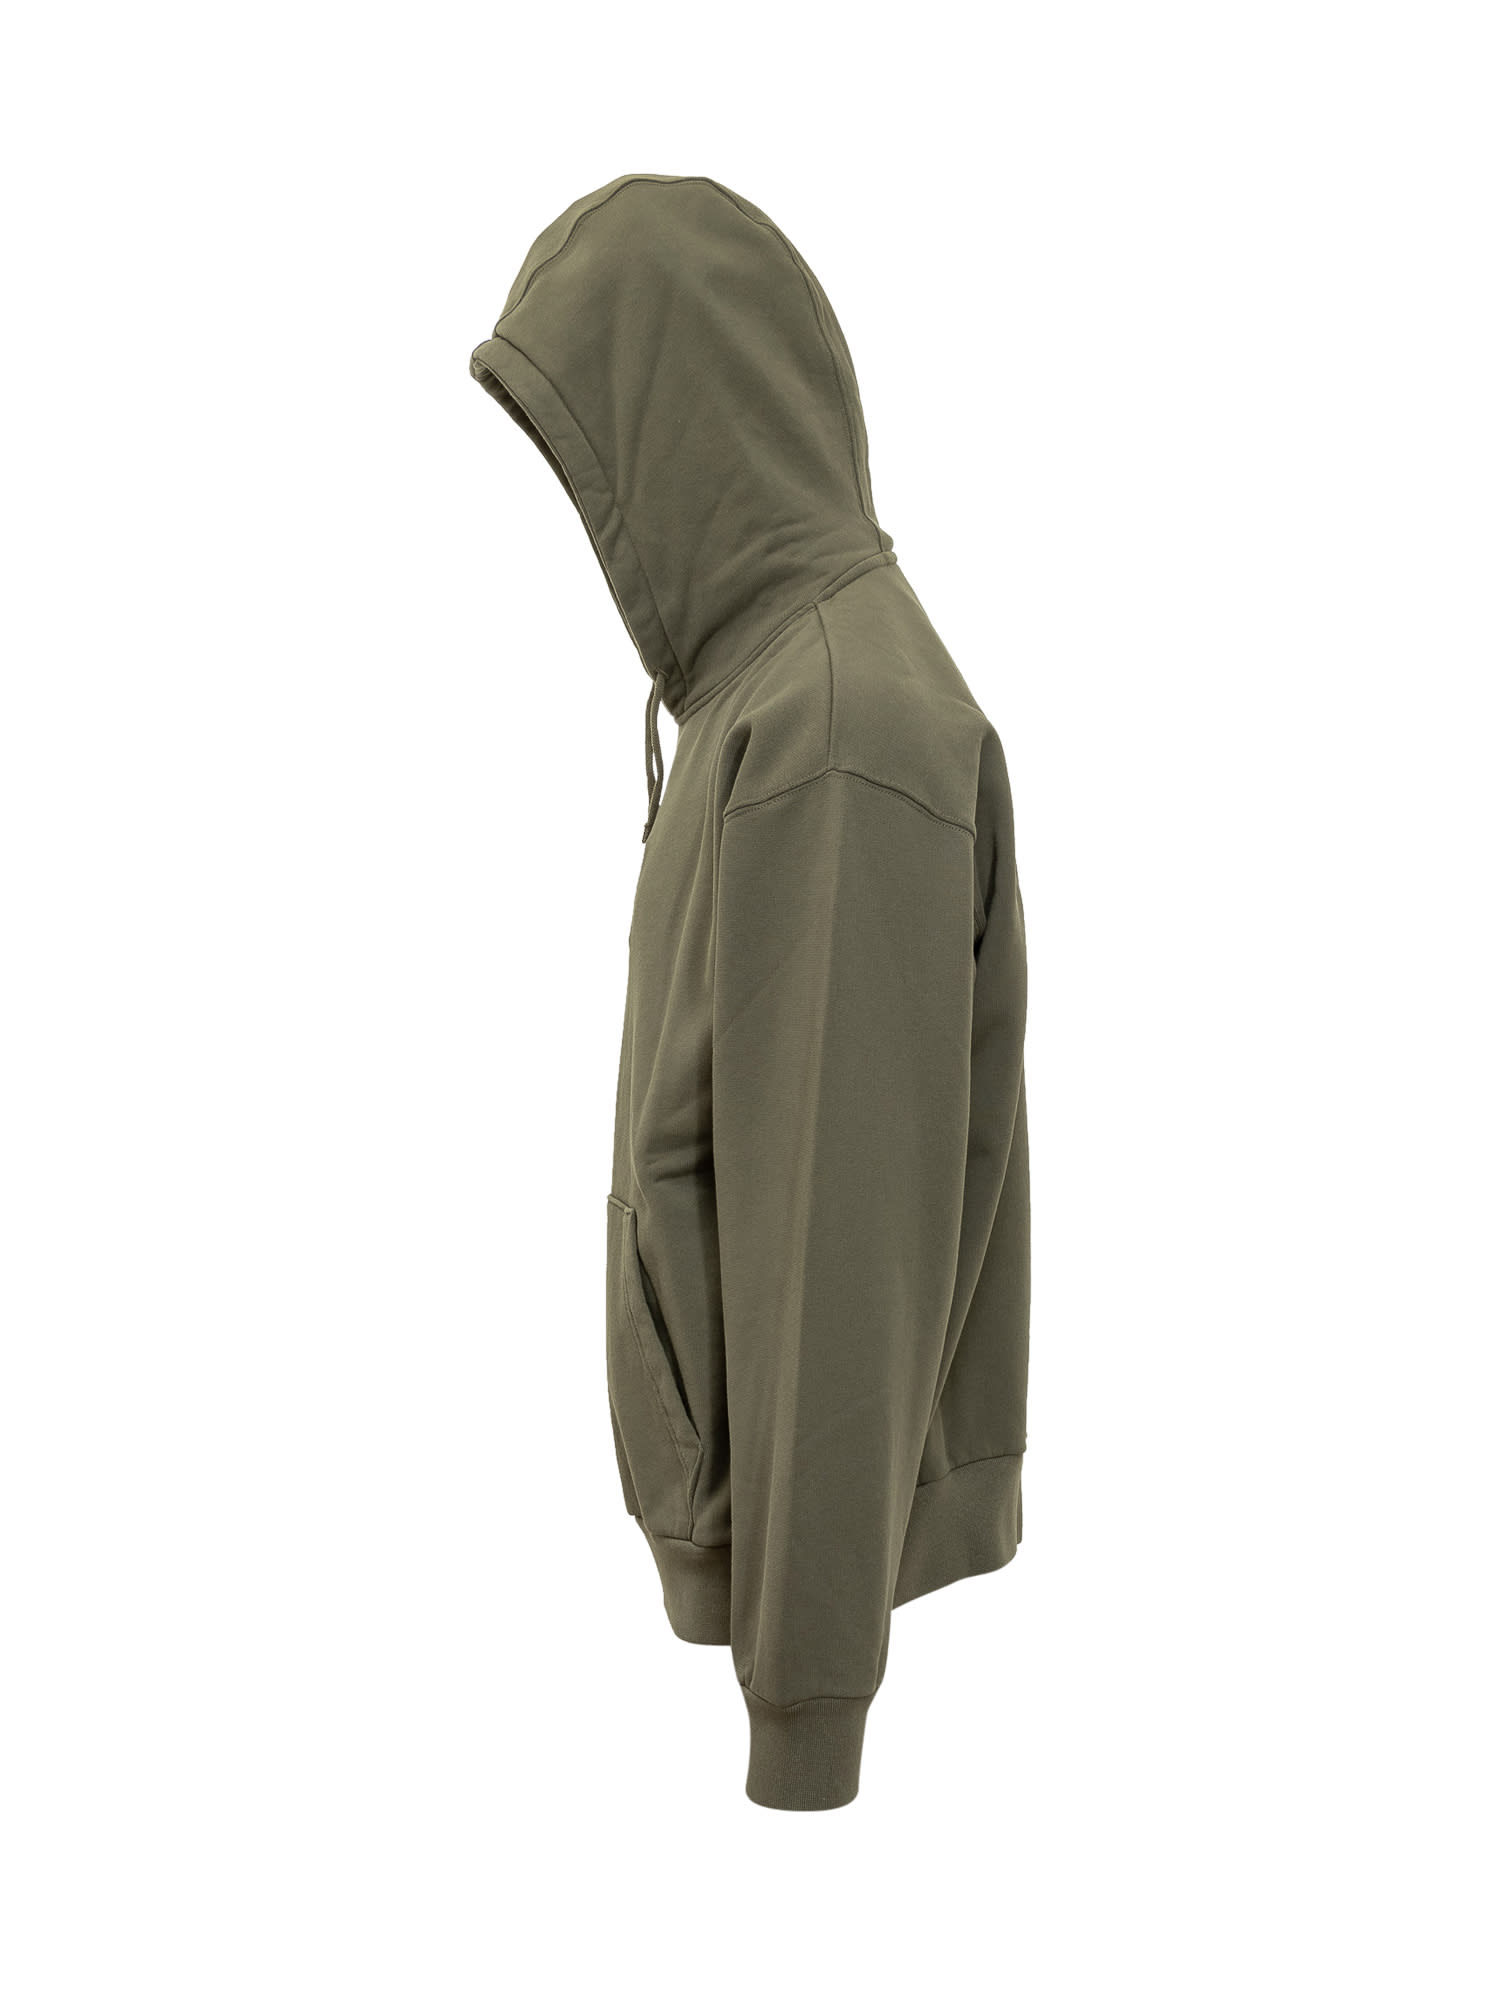 Shop Givenchy Hoodie In Olive Green